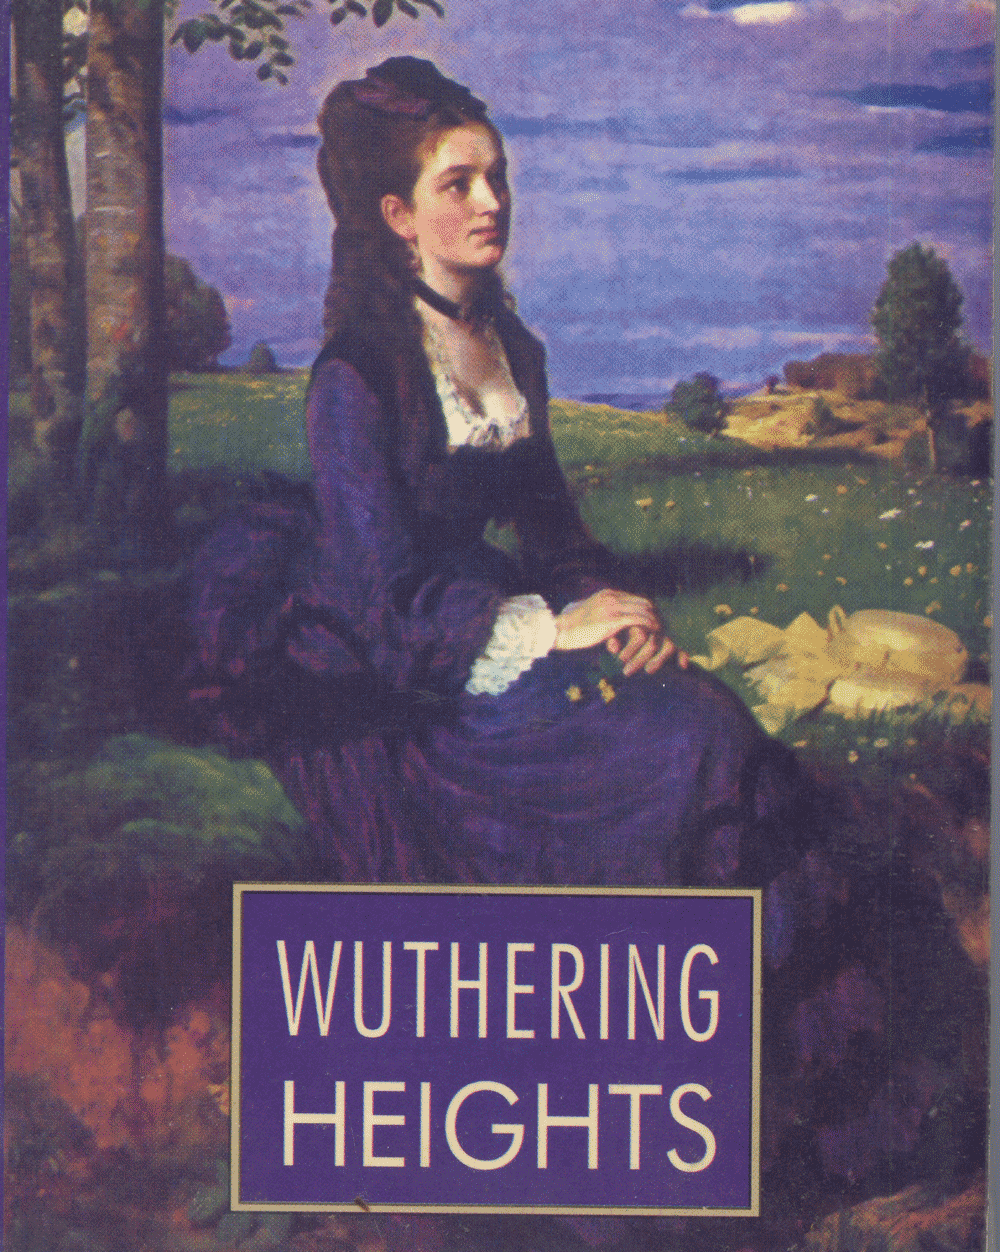 Wuthering heights by emily bront